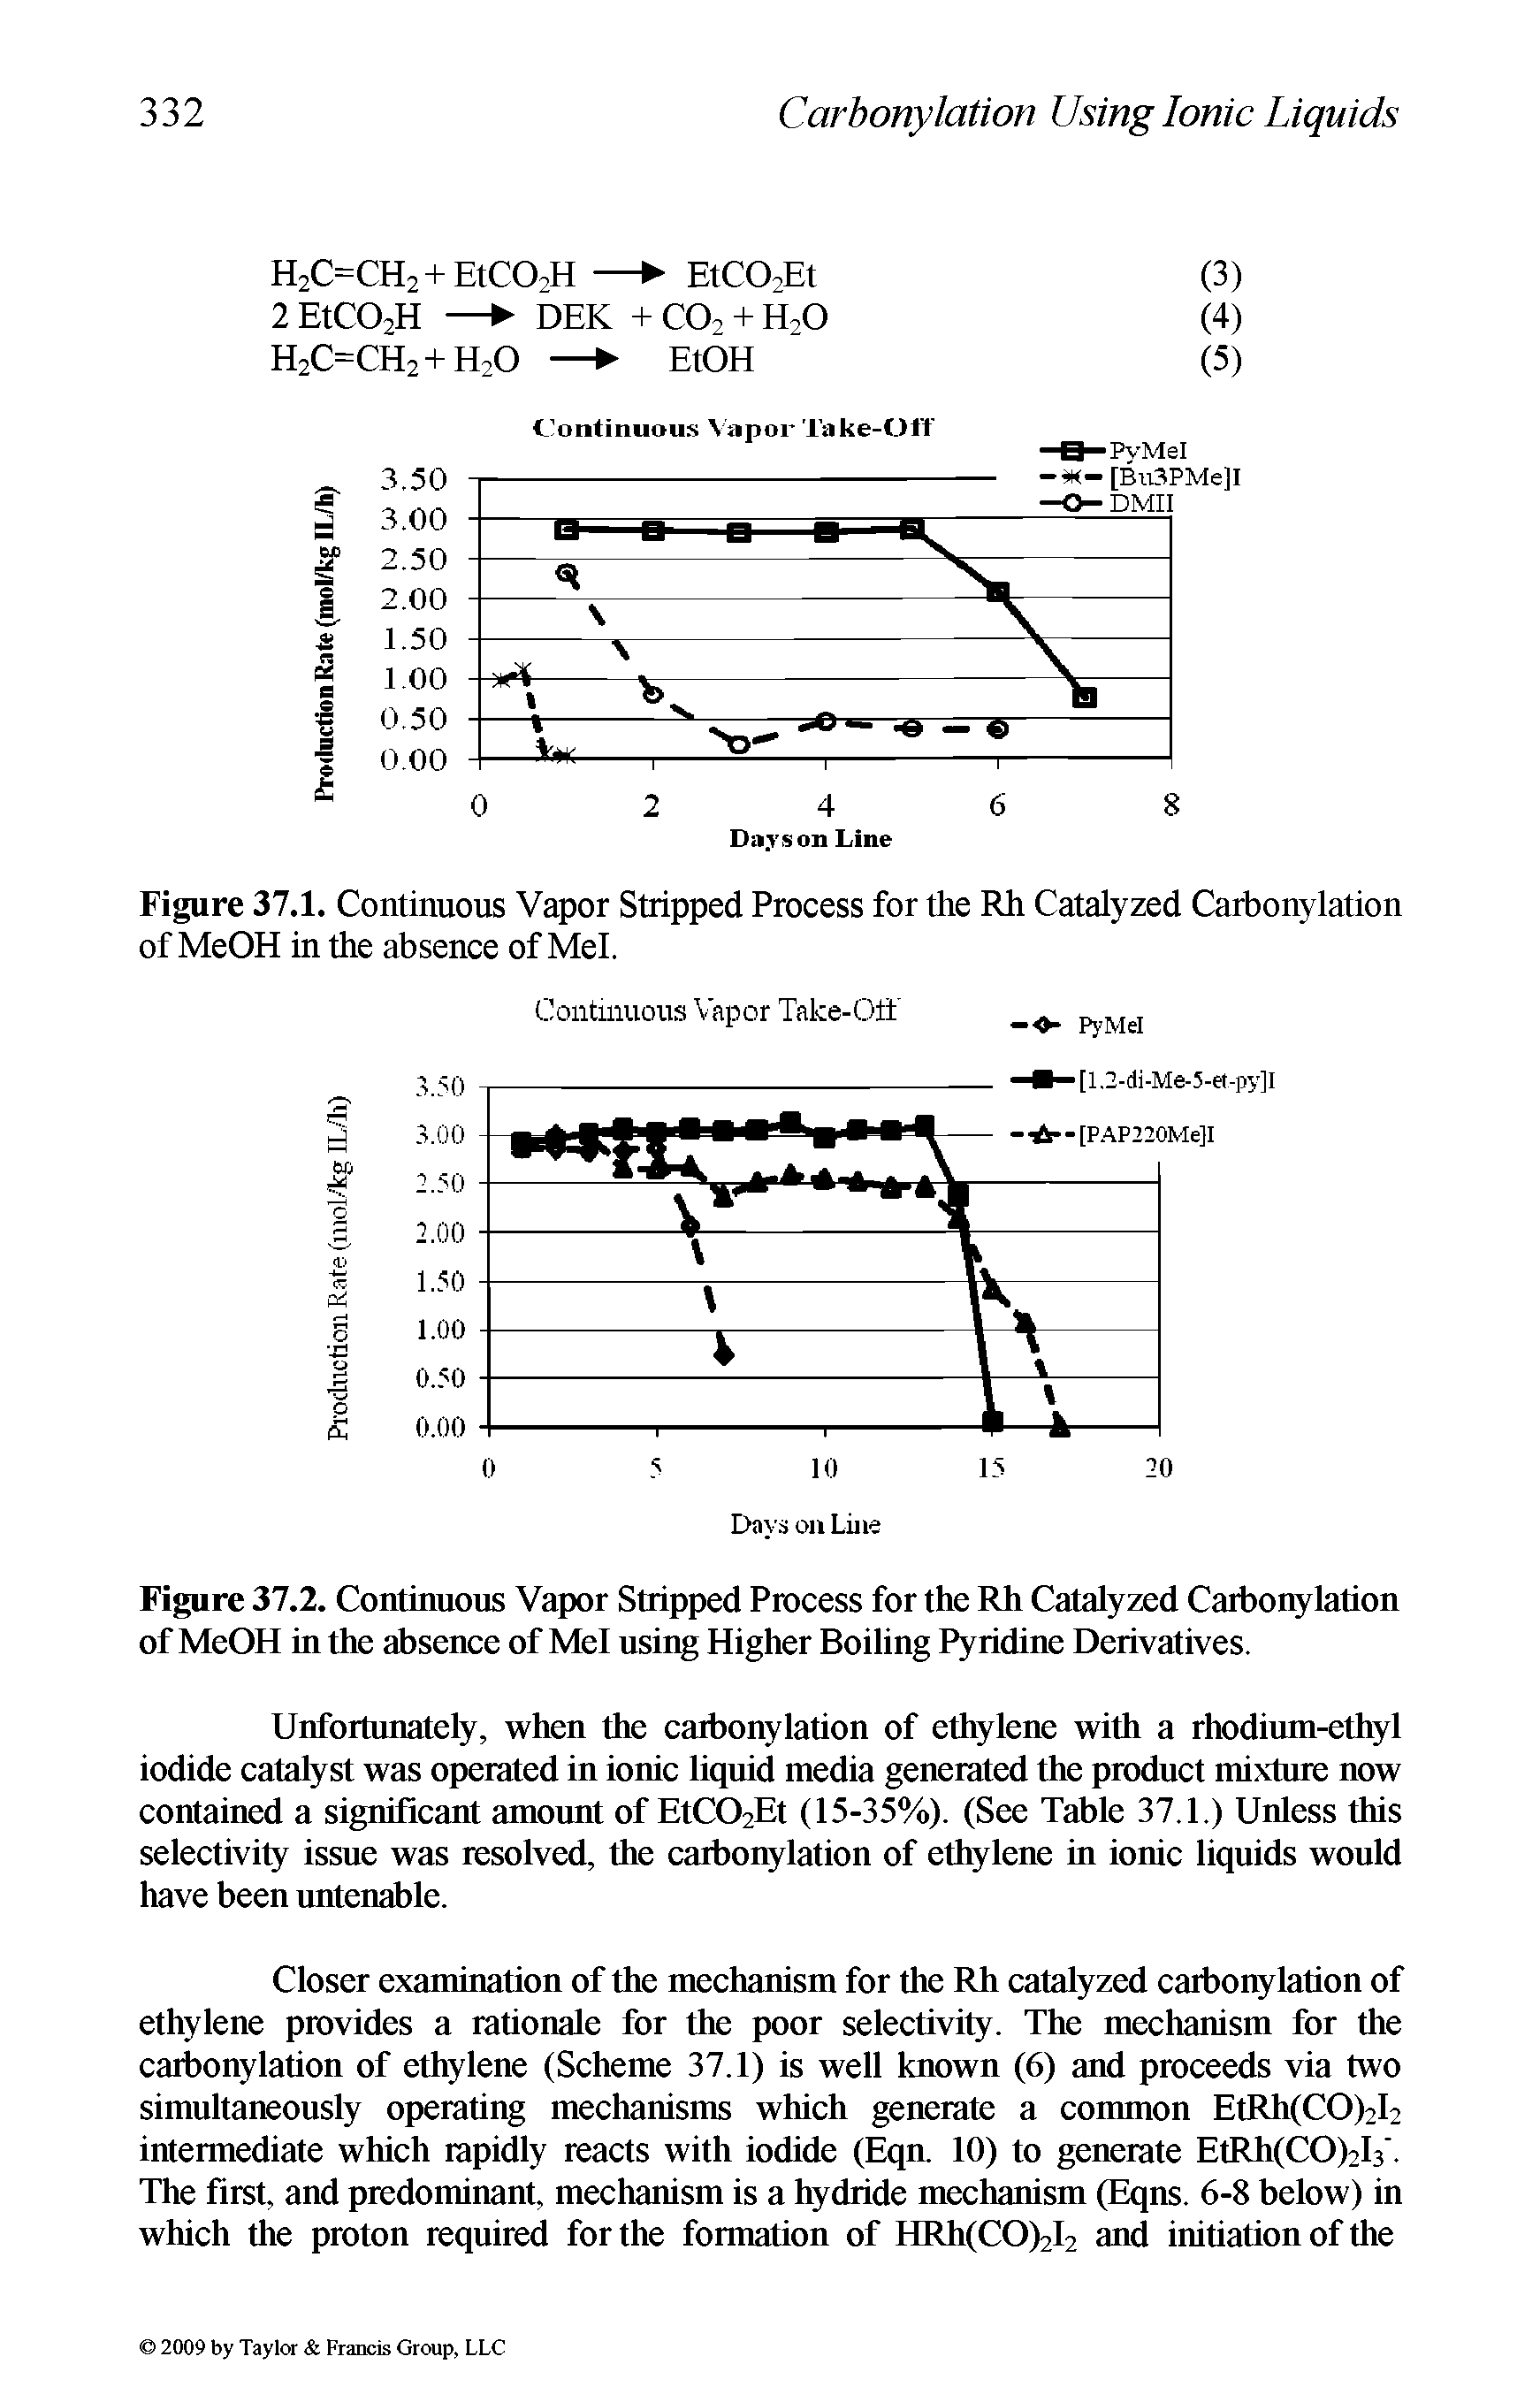 Figure 37.1. Continuous Vapor Stripped Process for the Rh Catalyzed Carbonylation of MeOH in the absence of Mel.